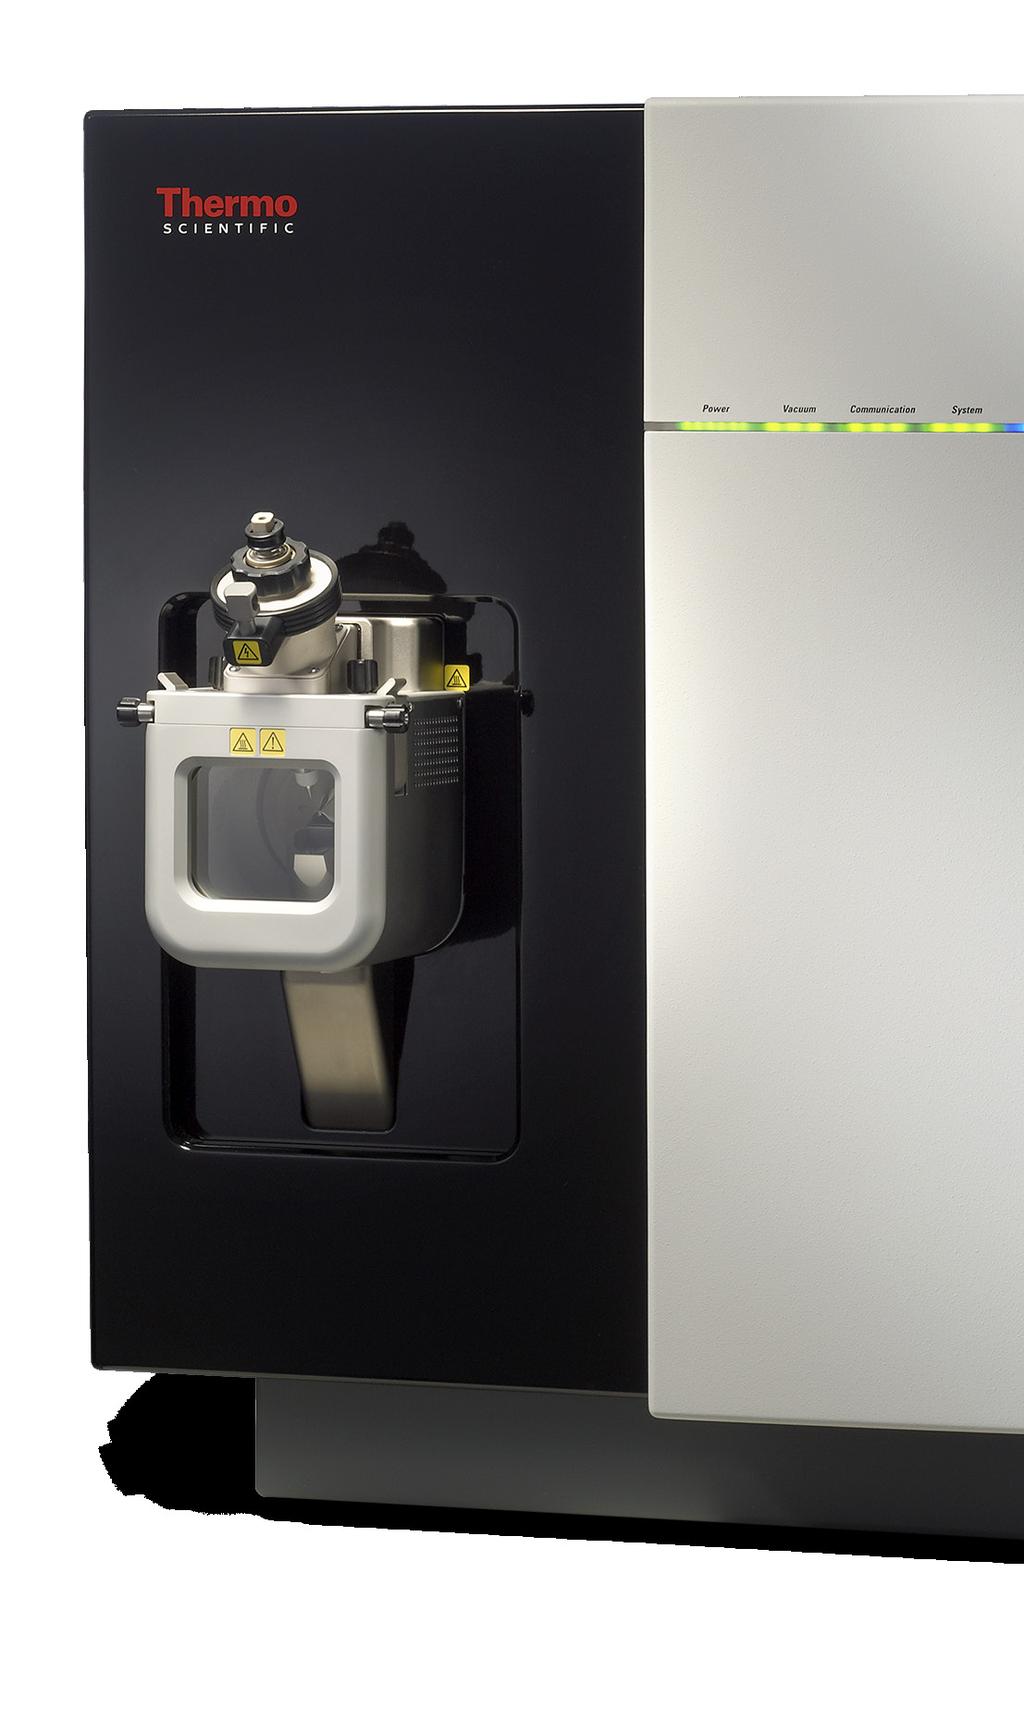 low-level or difficult-to-analyze samples. Unprecedented usability New software with a simplified user interface makes this next-generation triple quadrupole easier to use.